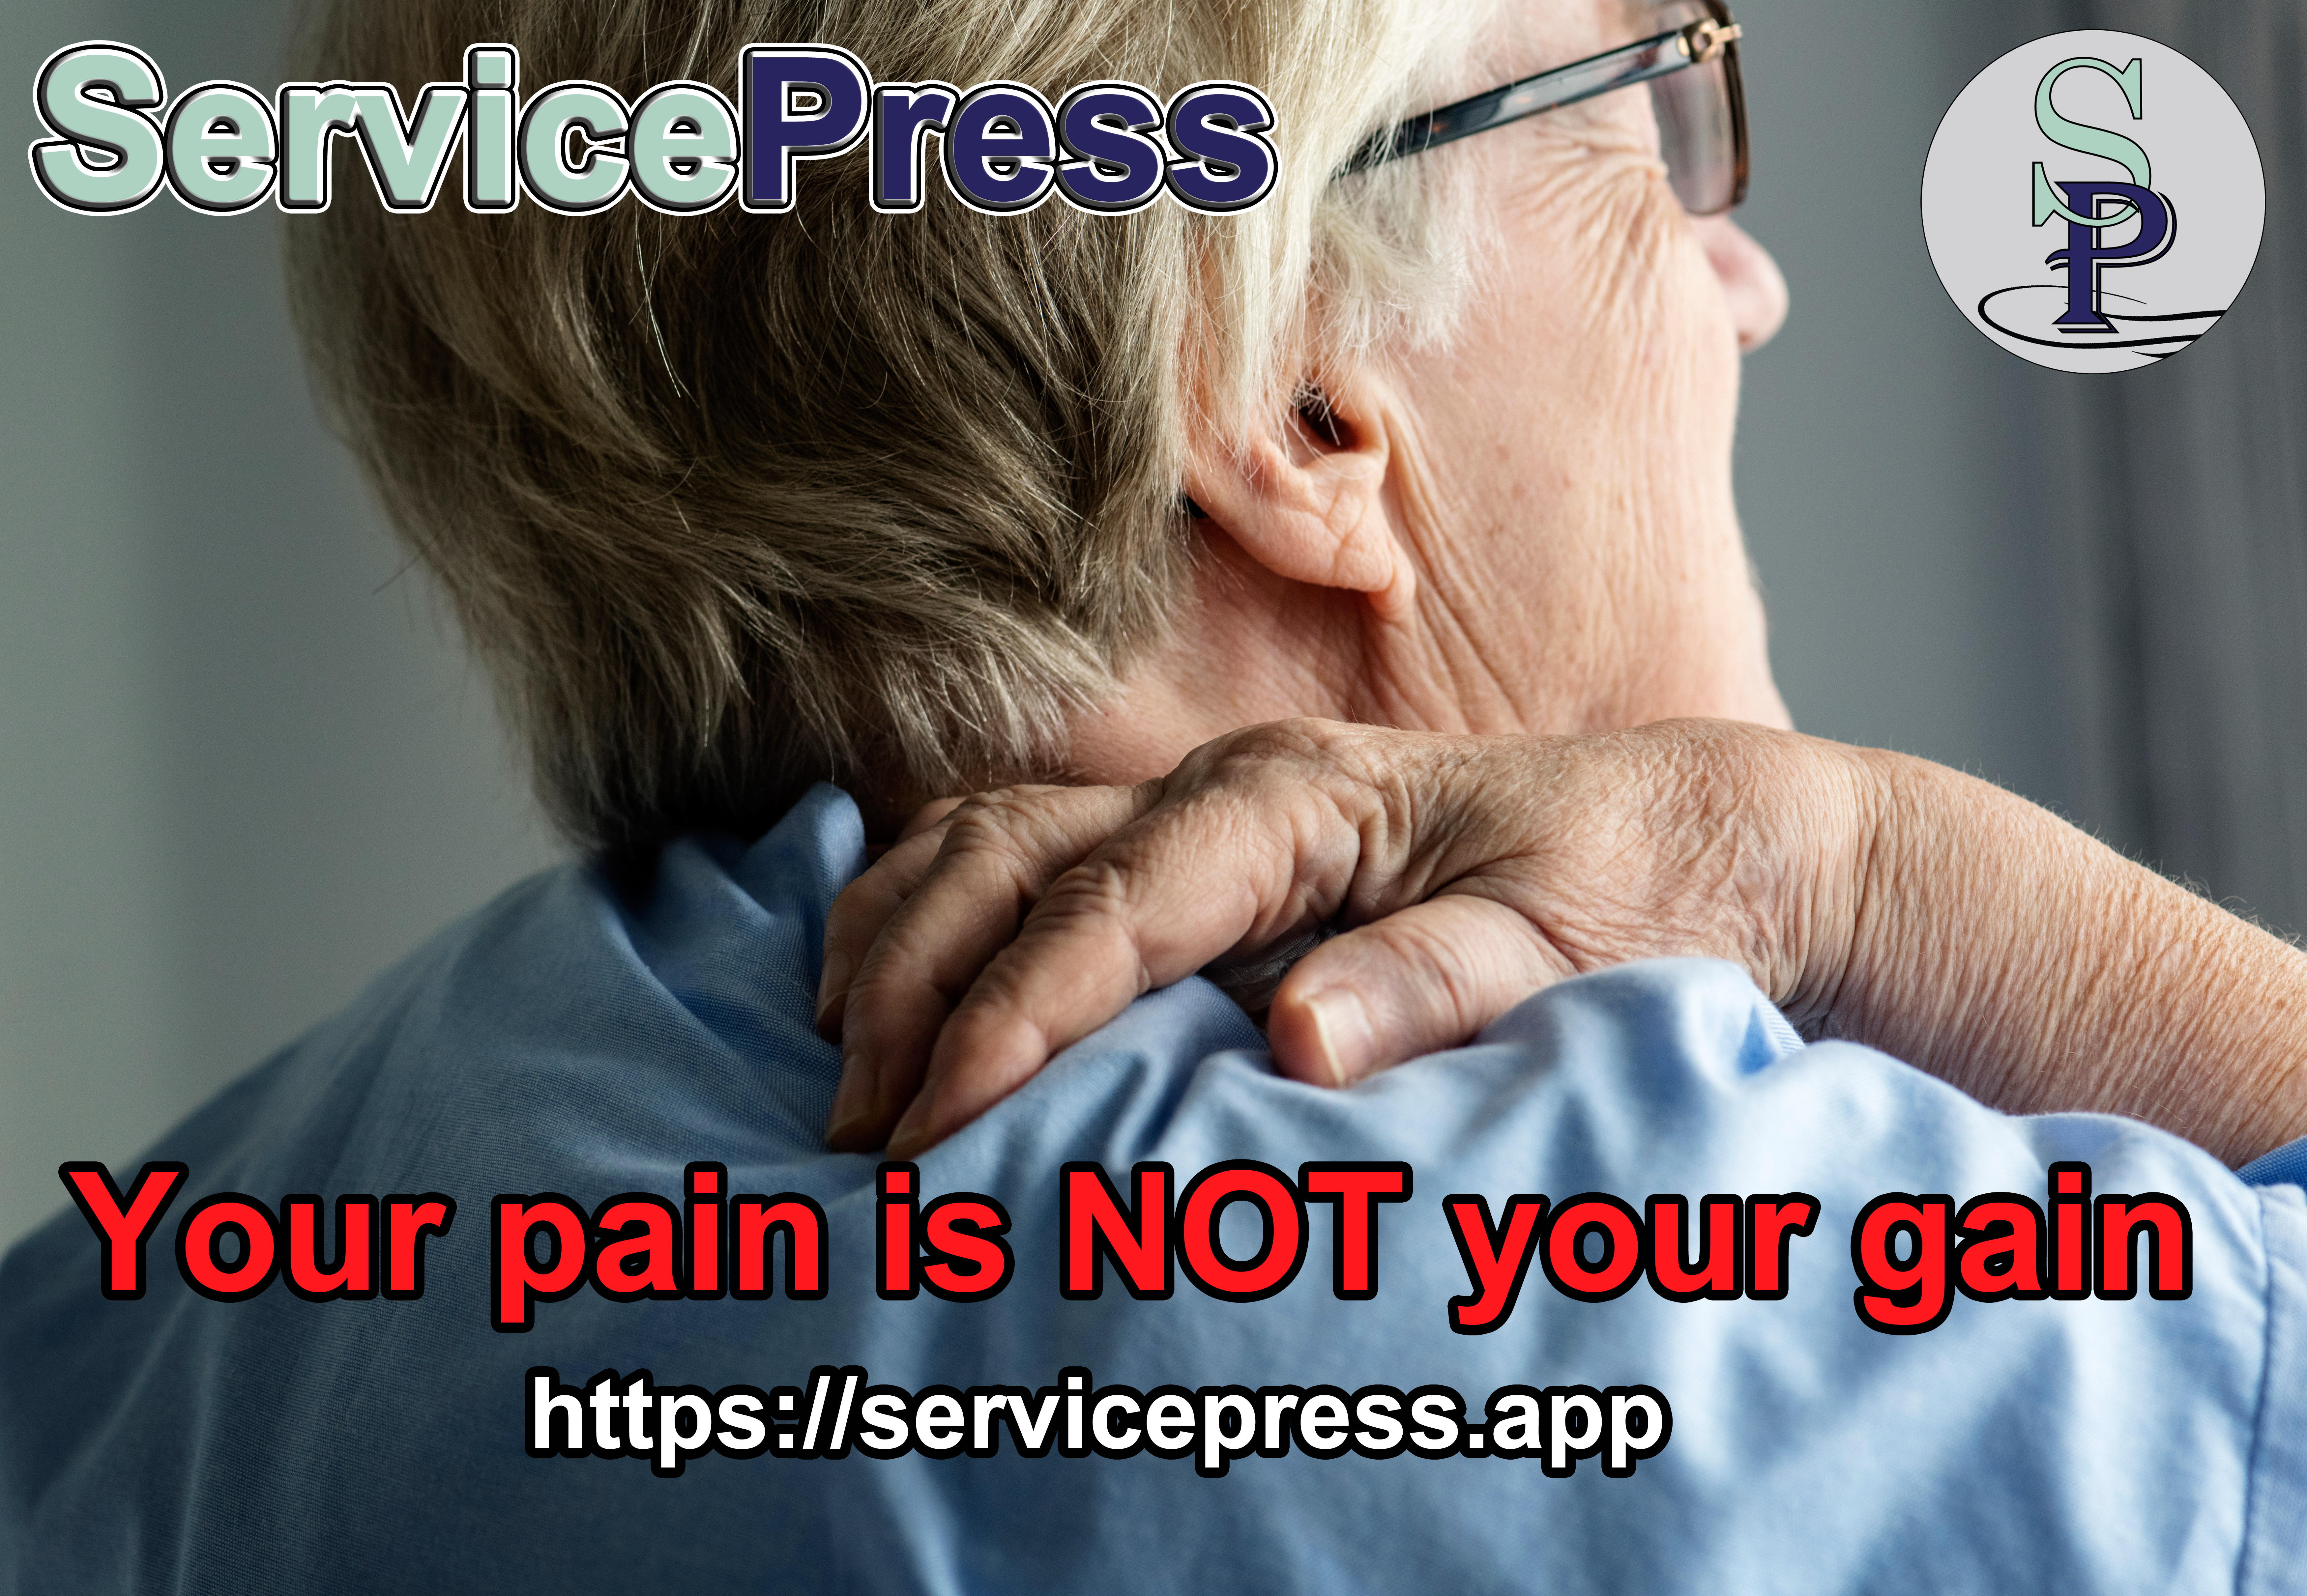 Follow the Pain to a Single Pane, with ServicePress